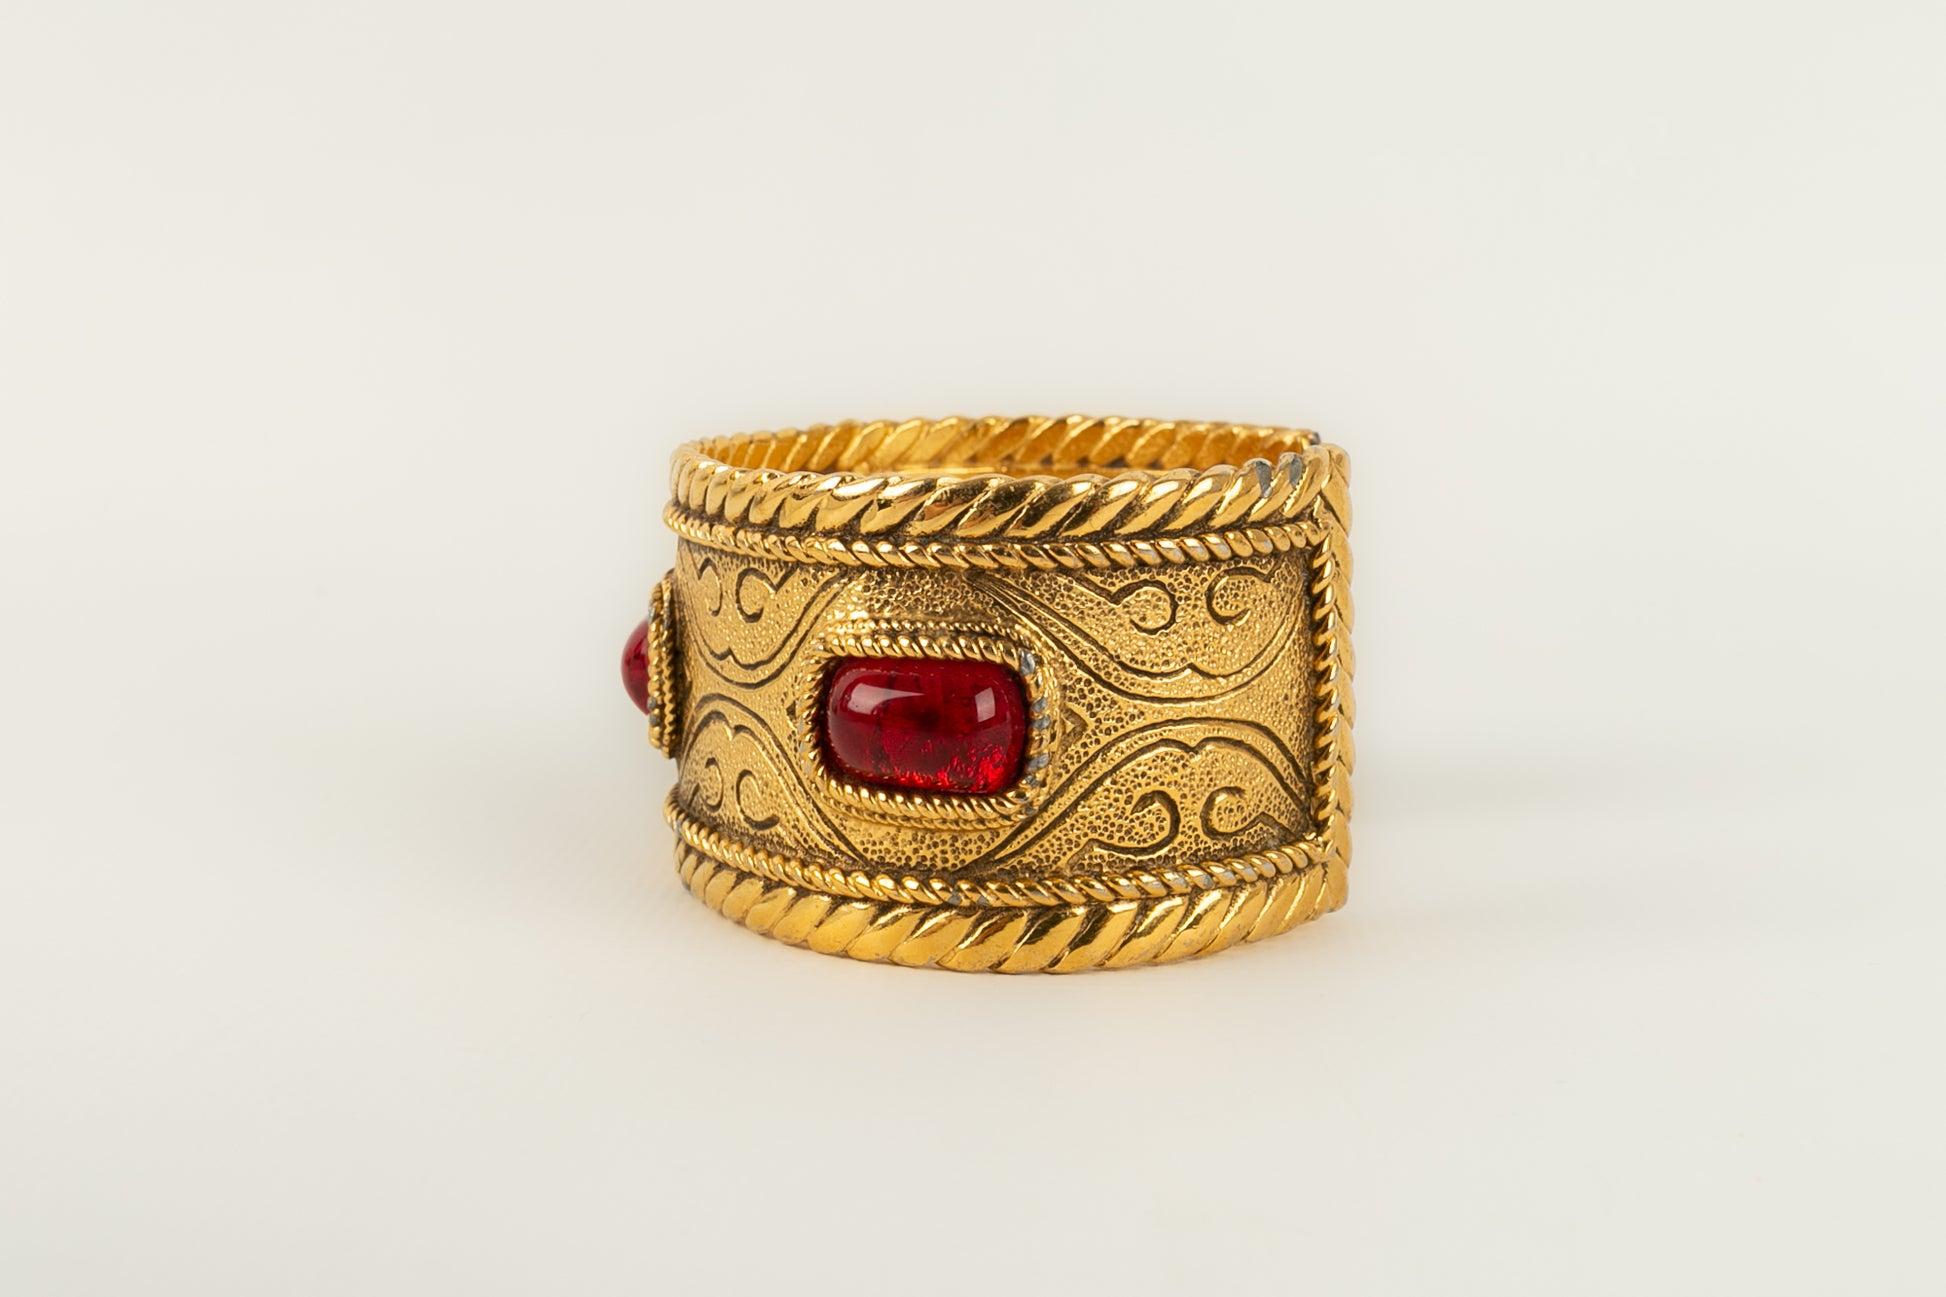 Women's Chanel Bracelet in Golden Metal and Red Glass Paste, 1985 For Sale